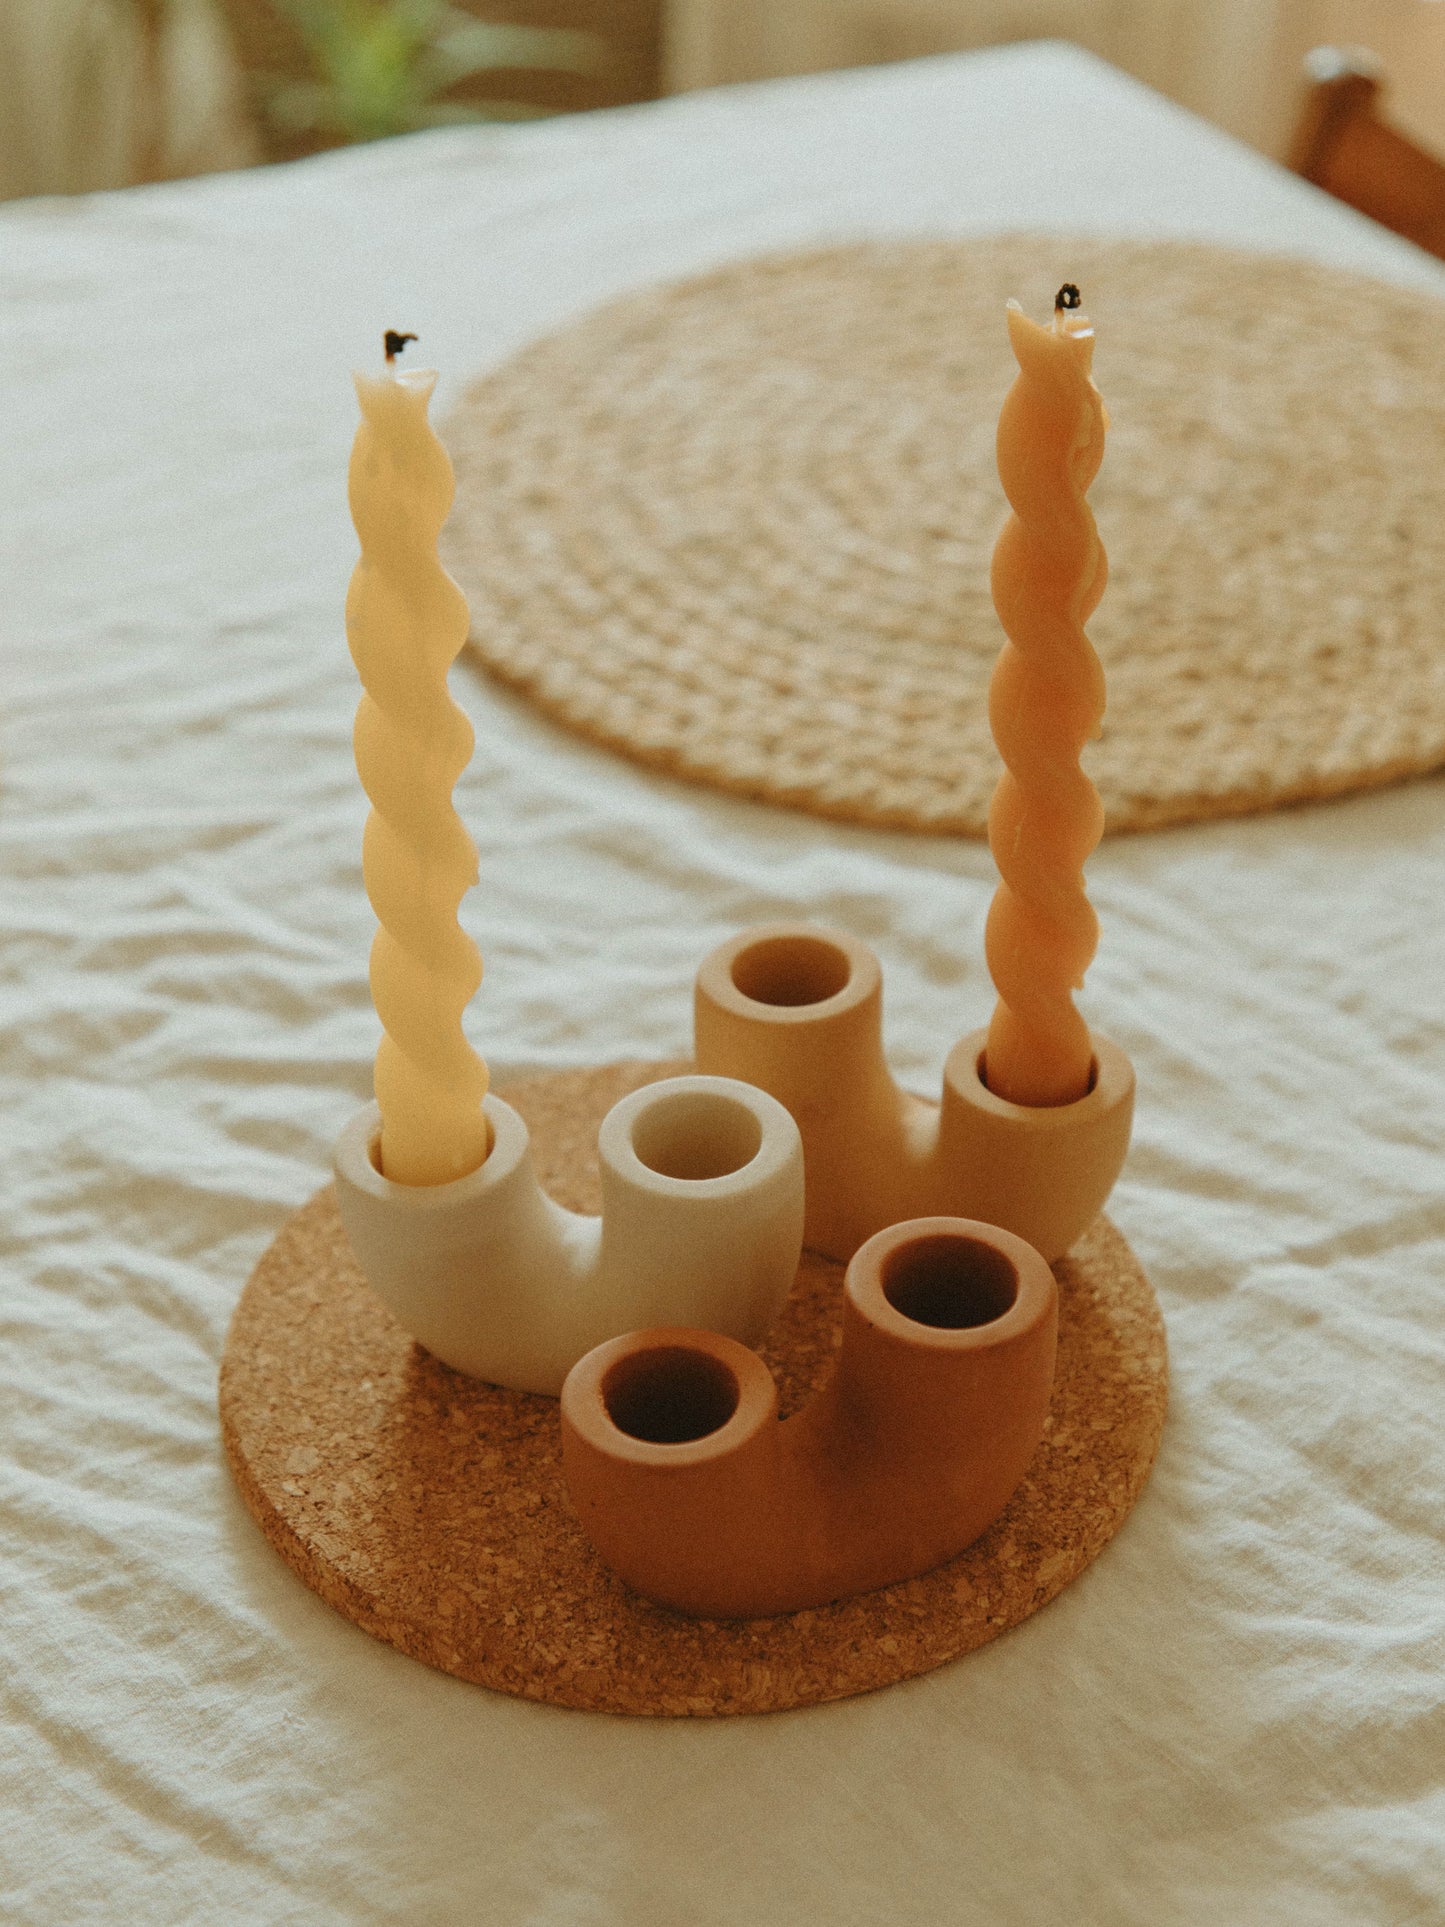 RISING CANDLE HOLDER